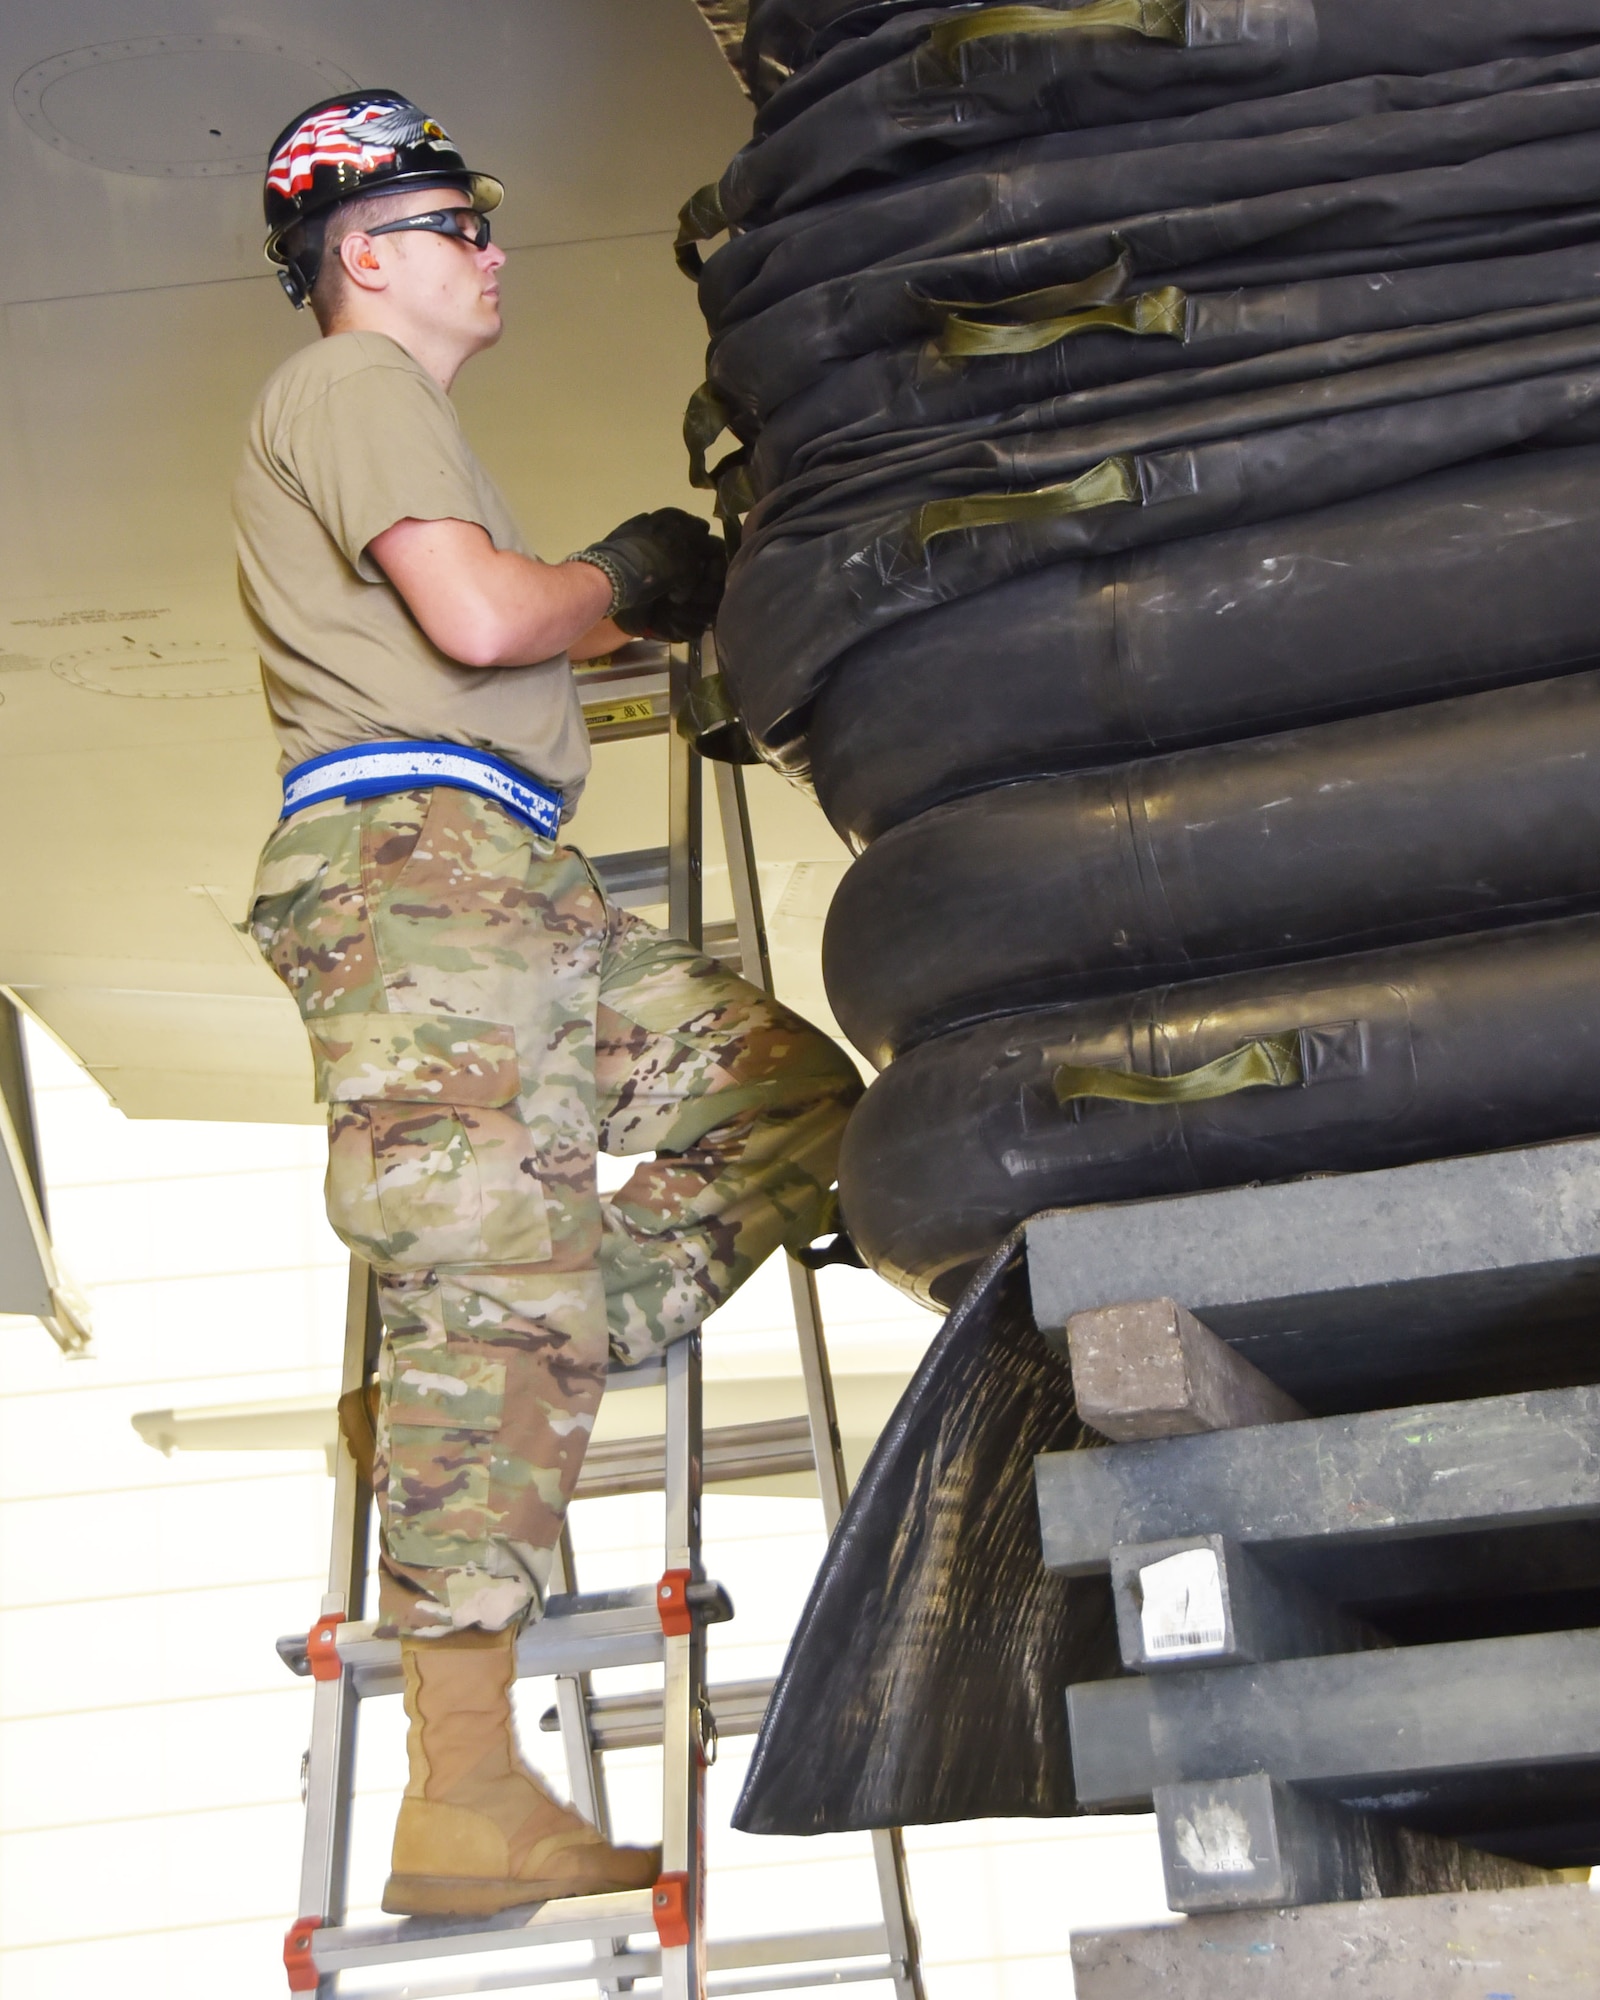 Tech. Sgt. Tommy James, 22nd Maintenance Squadron KC-46A Pegasus Repair and Reclamation craftsman, and Crashed, Damaged or Disabled Aircraft Recovery NCOIC, checks the lift bag for proper inflation and stability Sept. 17, 2020, at McConnell Air Force Base, Kansas.  The training was part of a week-long CDDAR exercise that involved 15 members from the 22nd and 931st Maintenance Squadrons.  The lifting bags are placed on top of a makeshift platfrom of railroad ties and plywood sheets, and under the wing of damaged aircraft secure it prior to beginning maintenance repairs